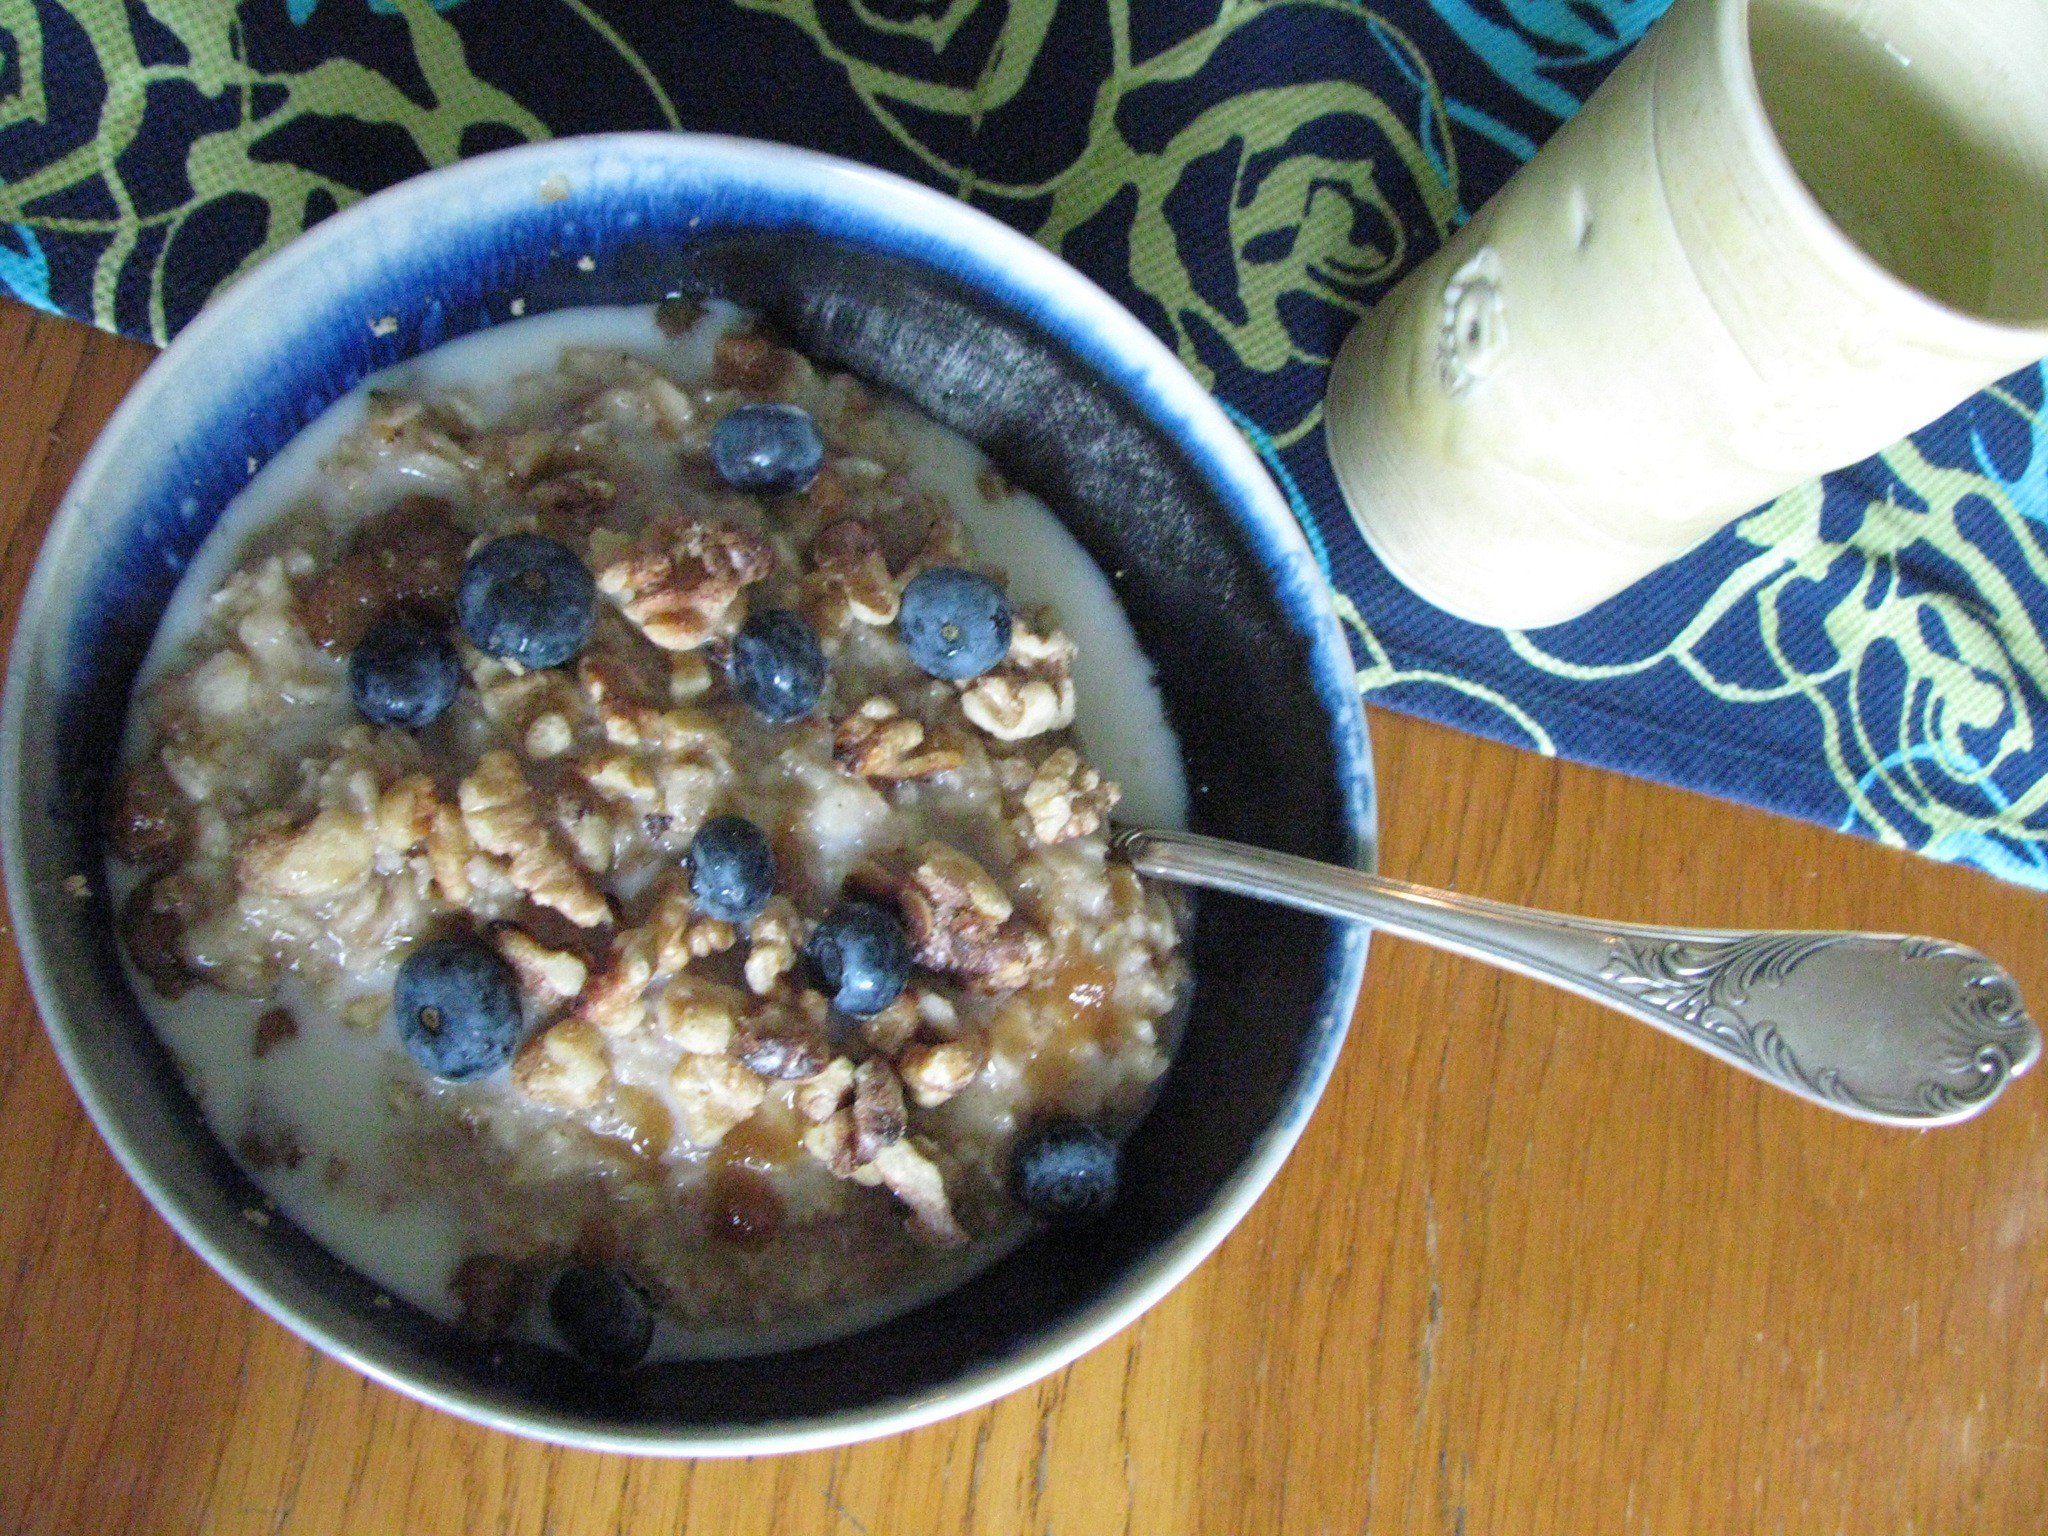 Oatmeal and Blueberries